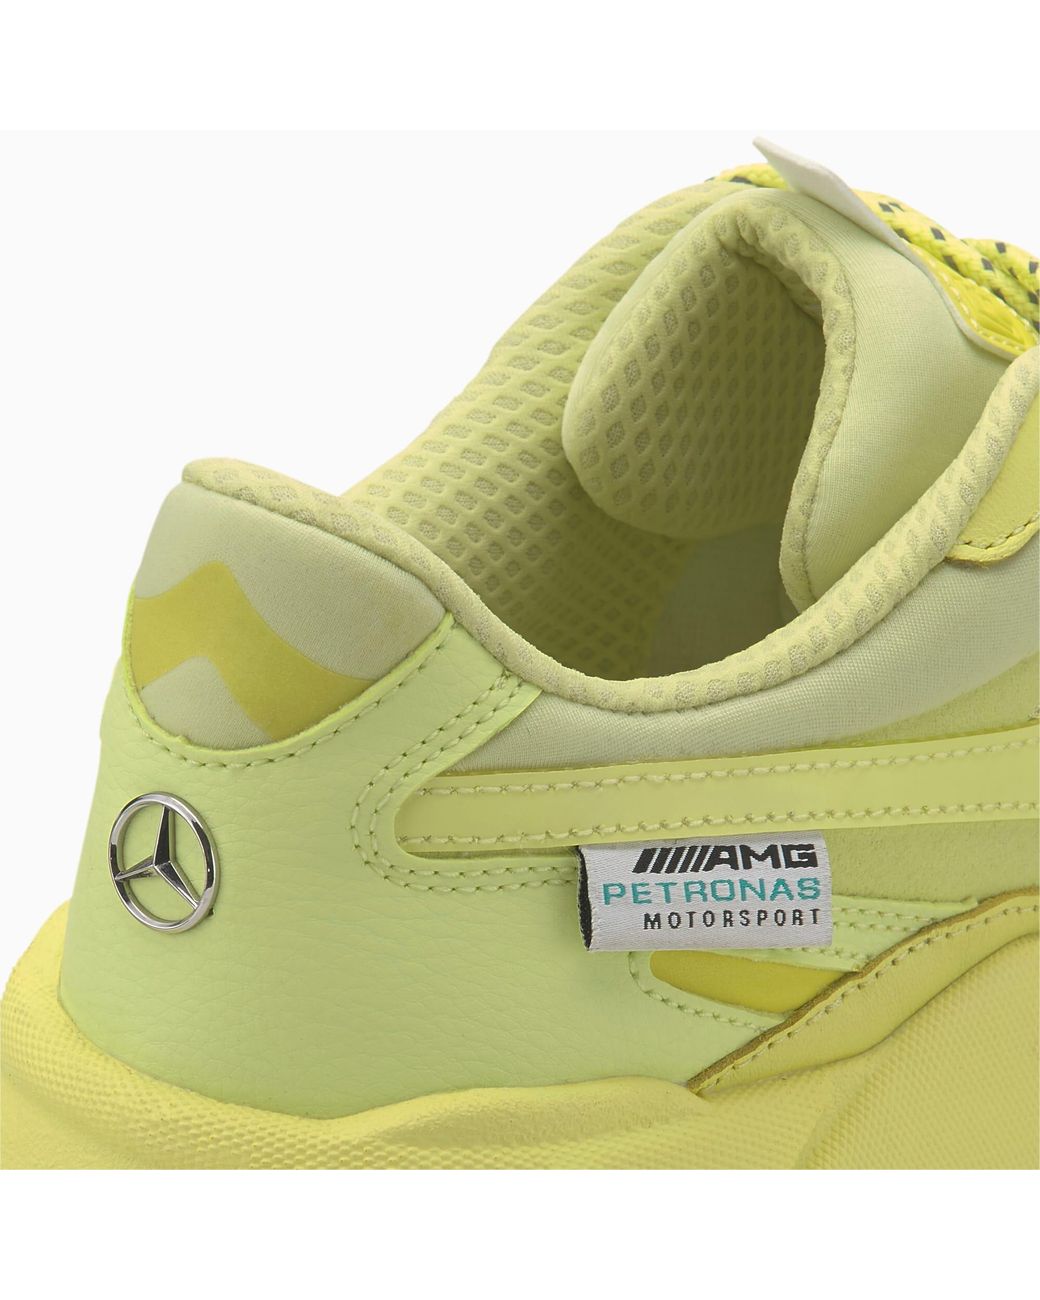 PUMA Synthetic Mercedes Amg Petronas Rs-x3 Sneakers in Green for Men | Lyst